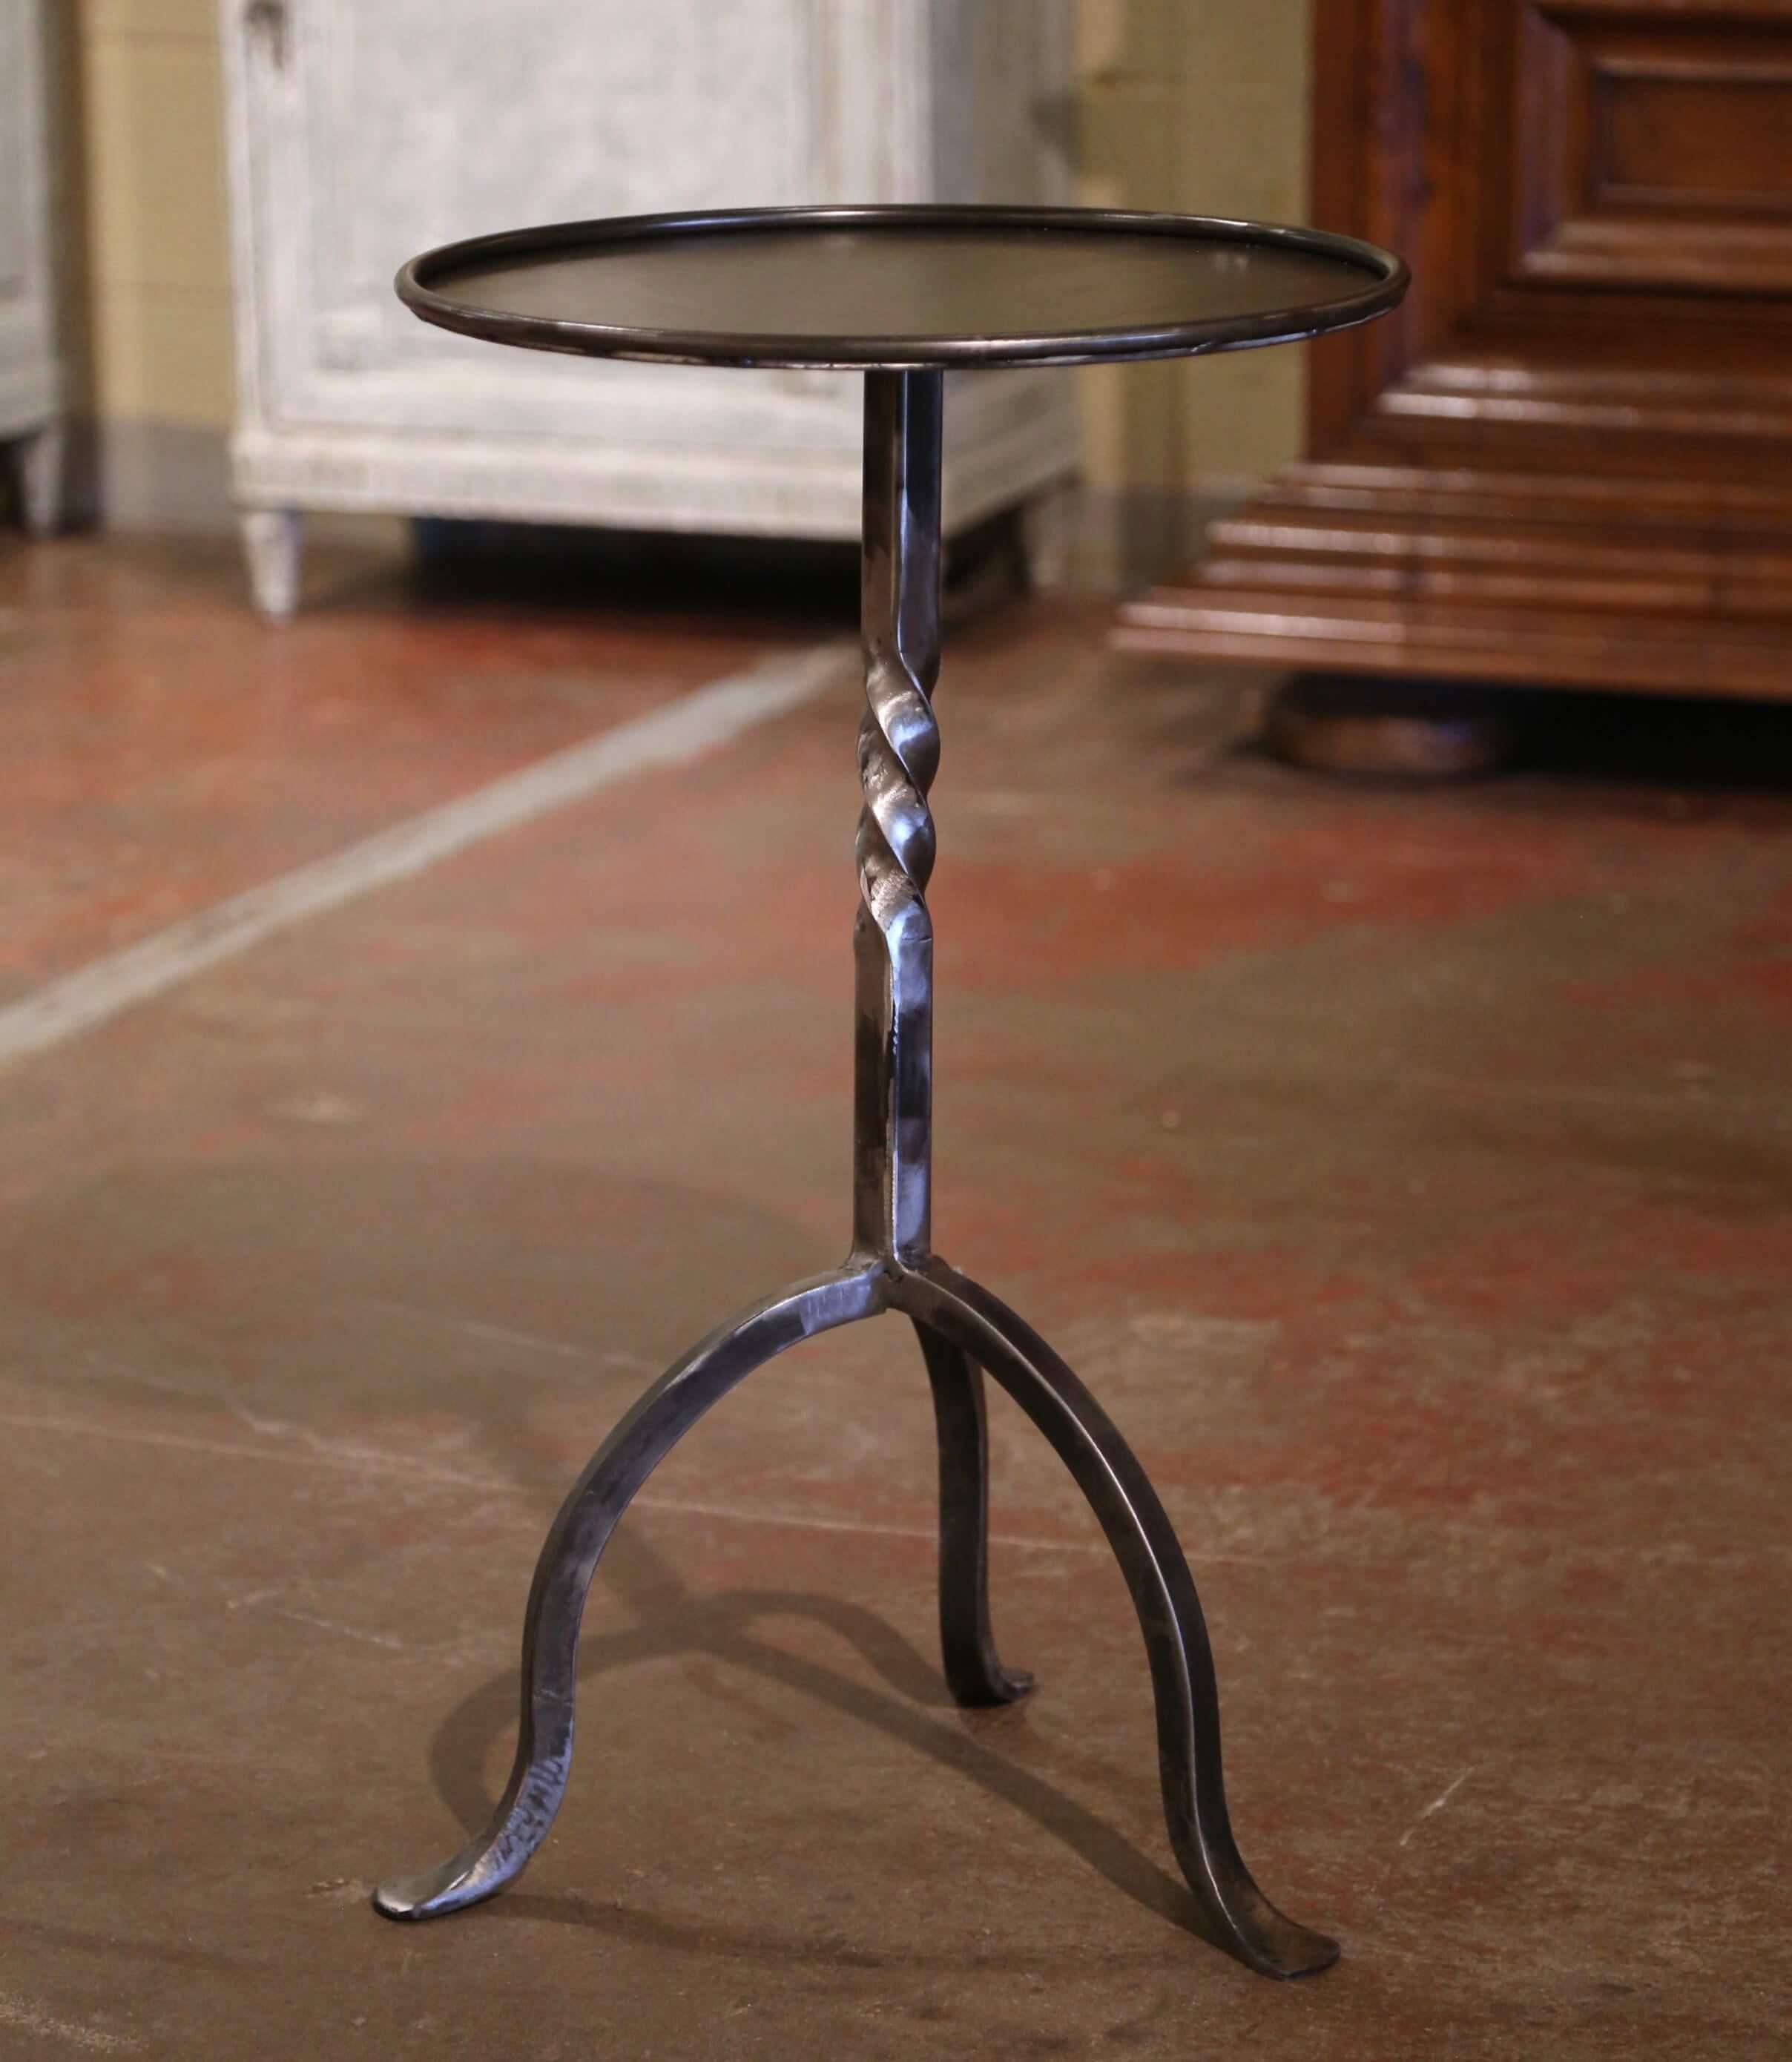 The elegant martini table features a central twisted pedestal stem over three curved legs ending with small feet. The heavy vintage serving table is topped with a round surface decorated with a raised rim around the periphery. The chic,